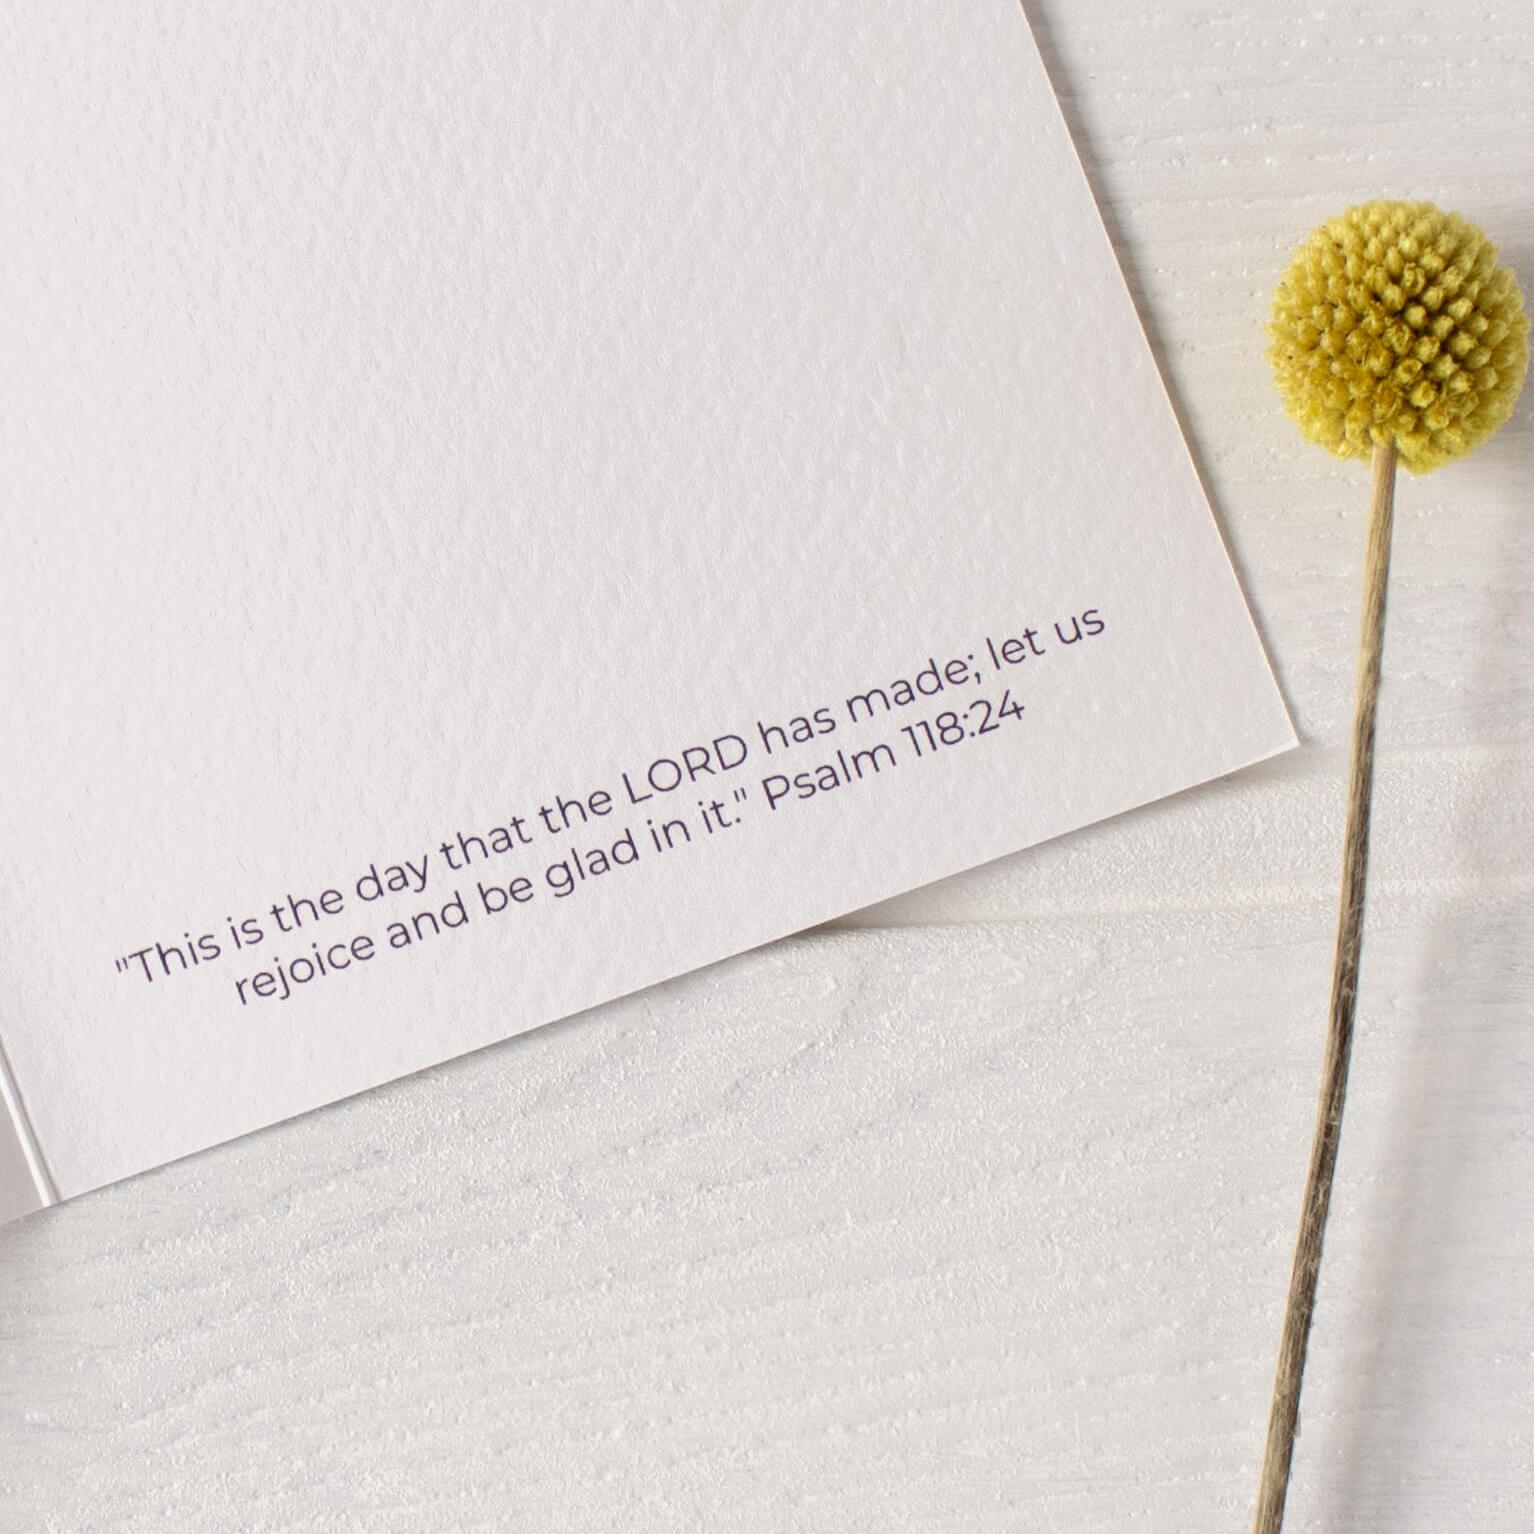 Psalm 118:24 is the Bible verse inside the Happy Birthday (BirthYay) Card